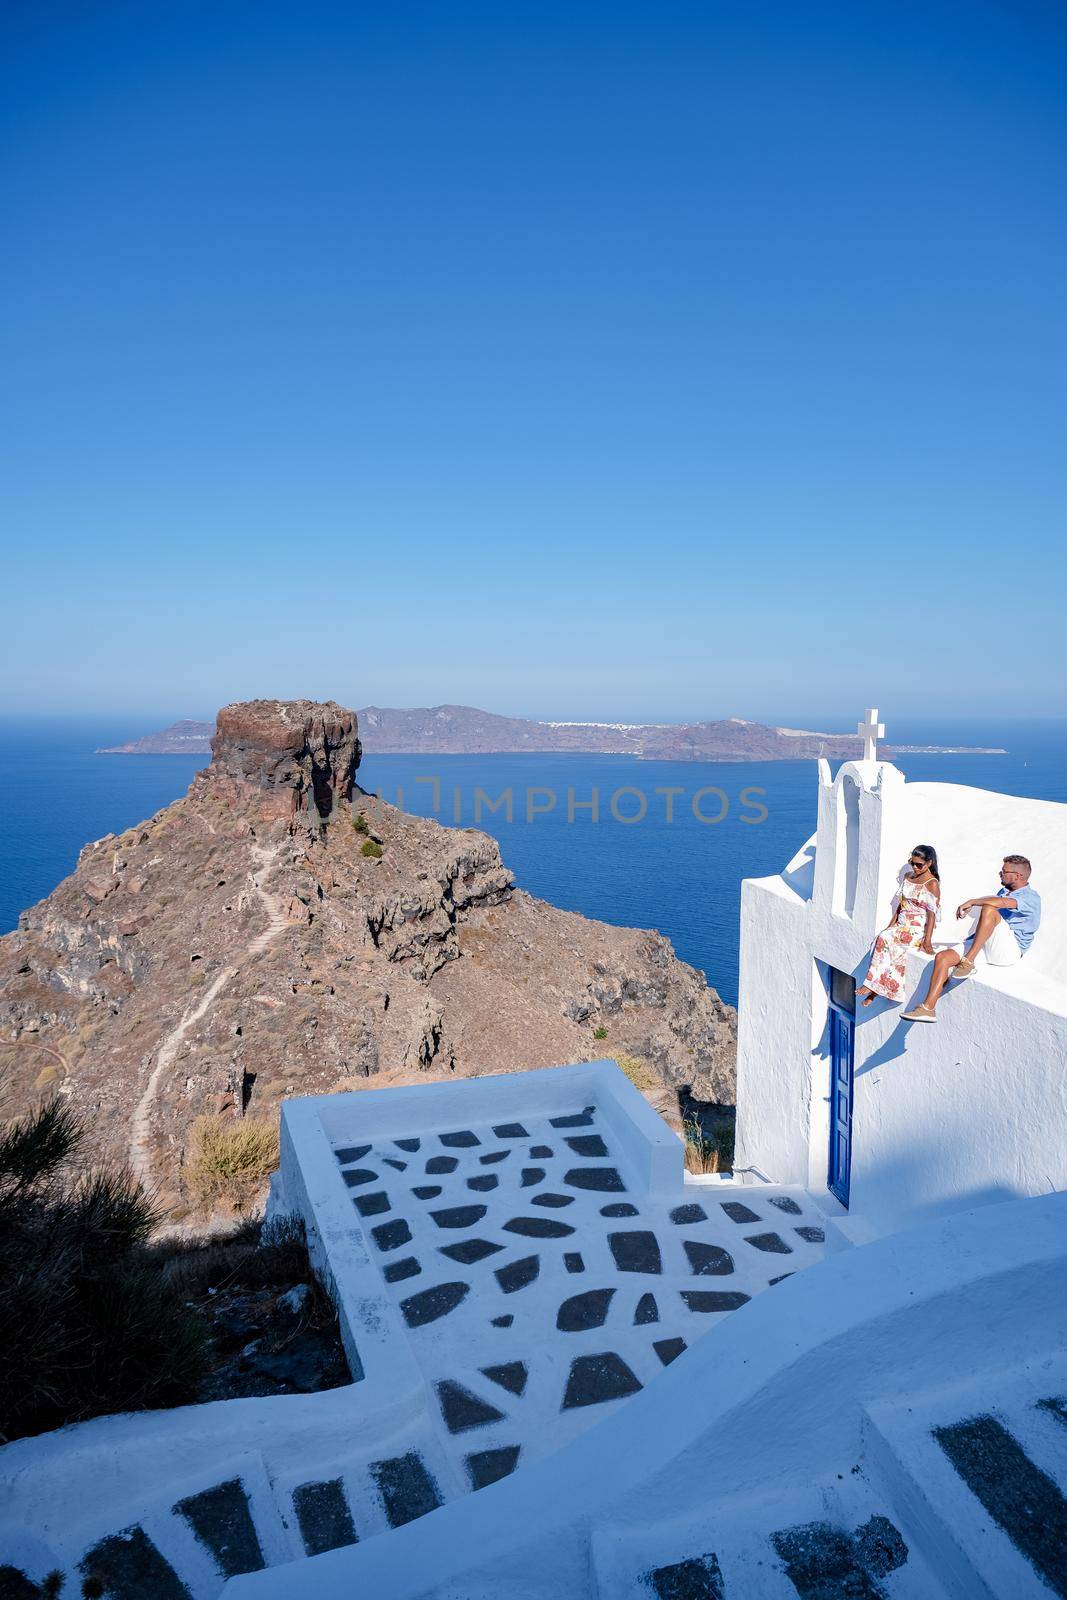 Santorini Greece, young couple mid age European and Asian on vacation at the Greek village of Oia Santorini Greece, luxury vacation Santorini. mid age man and woman watching sunset Santorini